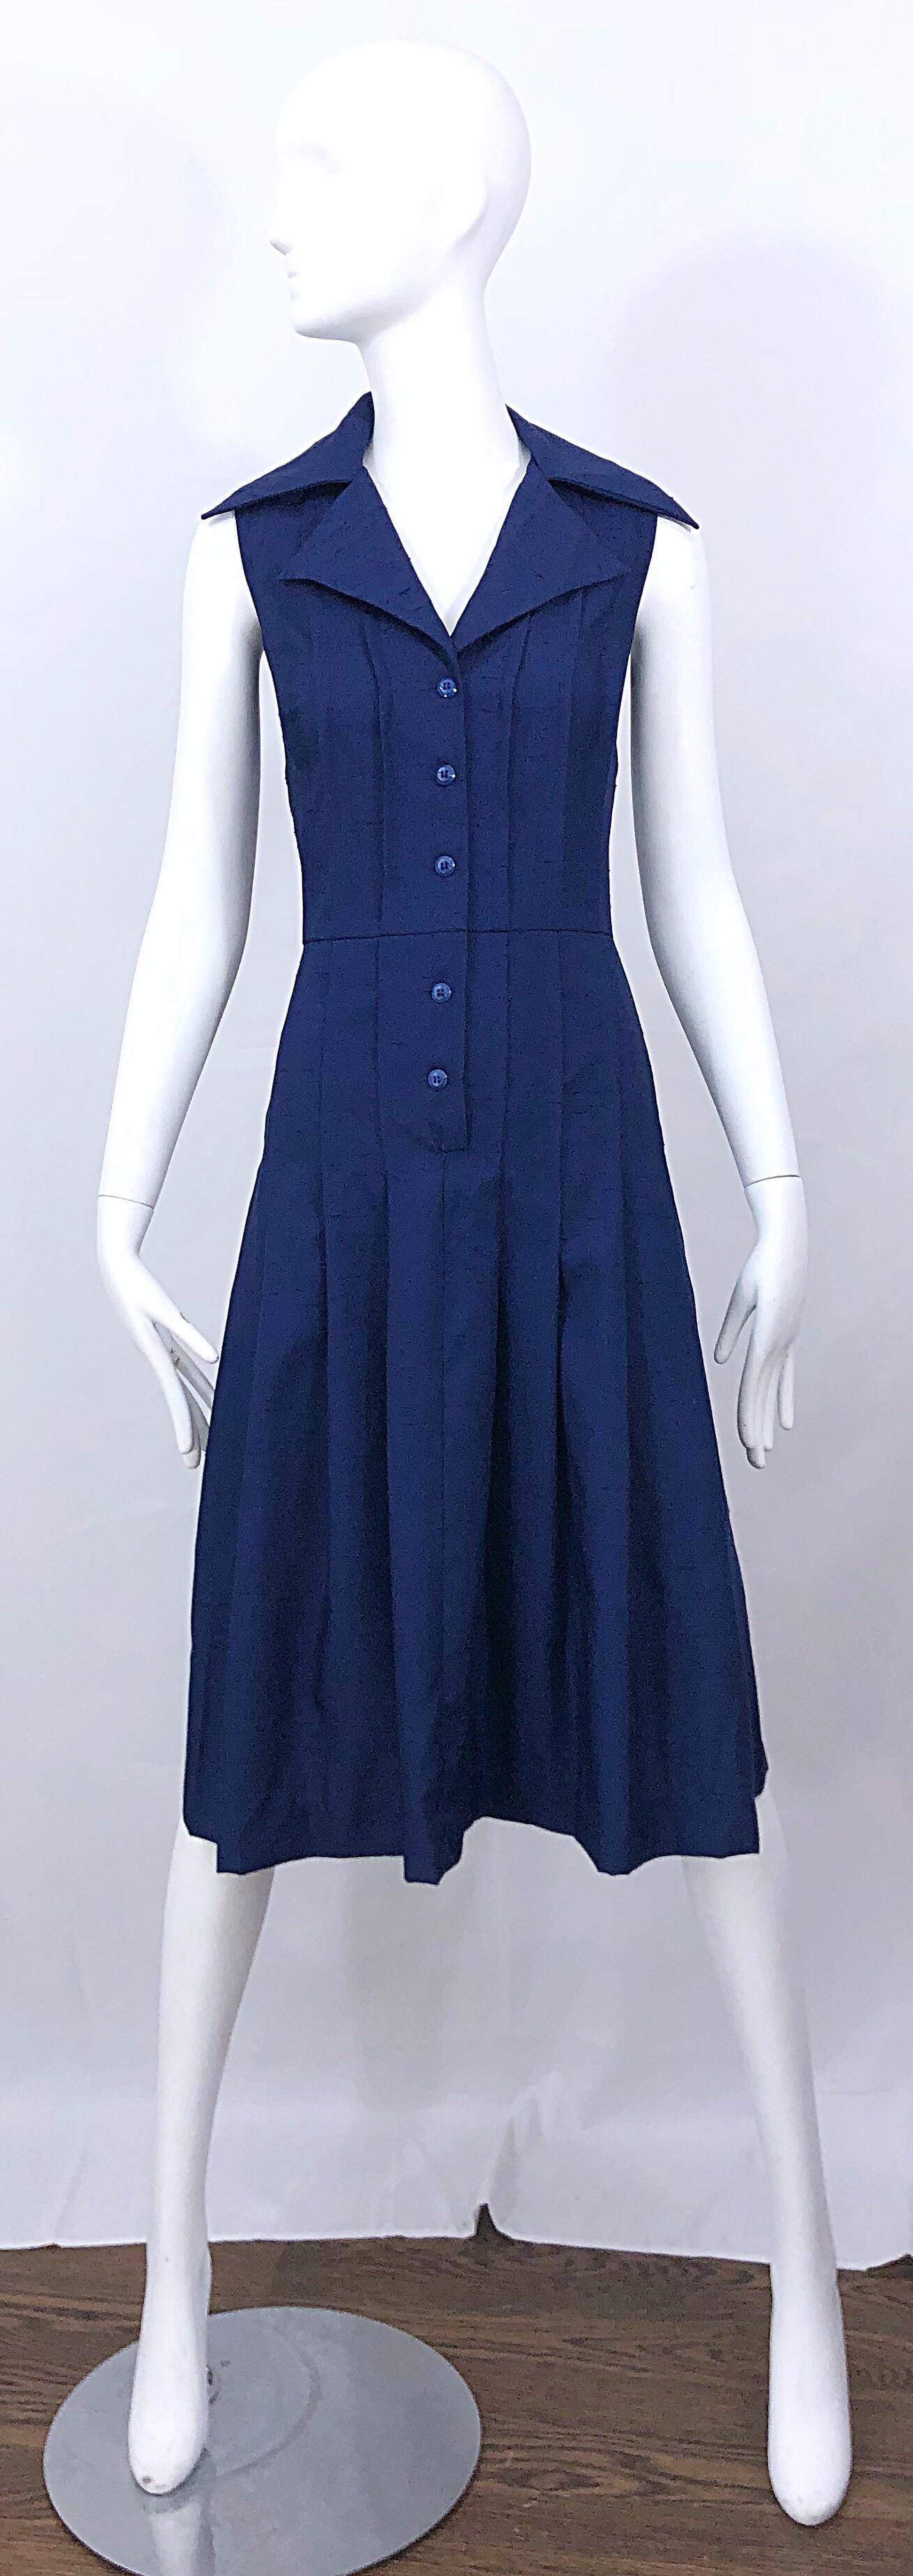 Chic beuatiful early 90s SAKS 5TH AVE. navy blue size 10 sleeveless silk fit n' flare shirt dress! Buttons up the bodice. 1950s style with a fitted bodice and a forgiving full skirt. Avant Garde oversized pointed collar. The perfect dress that can